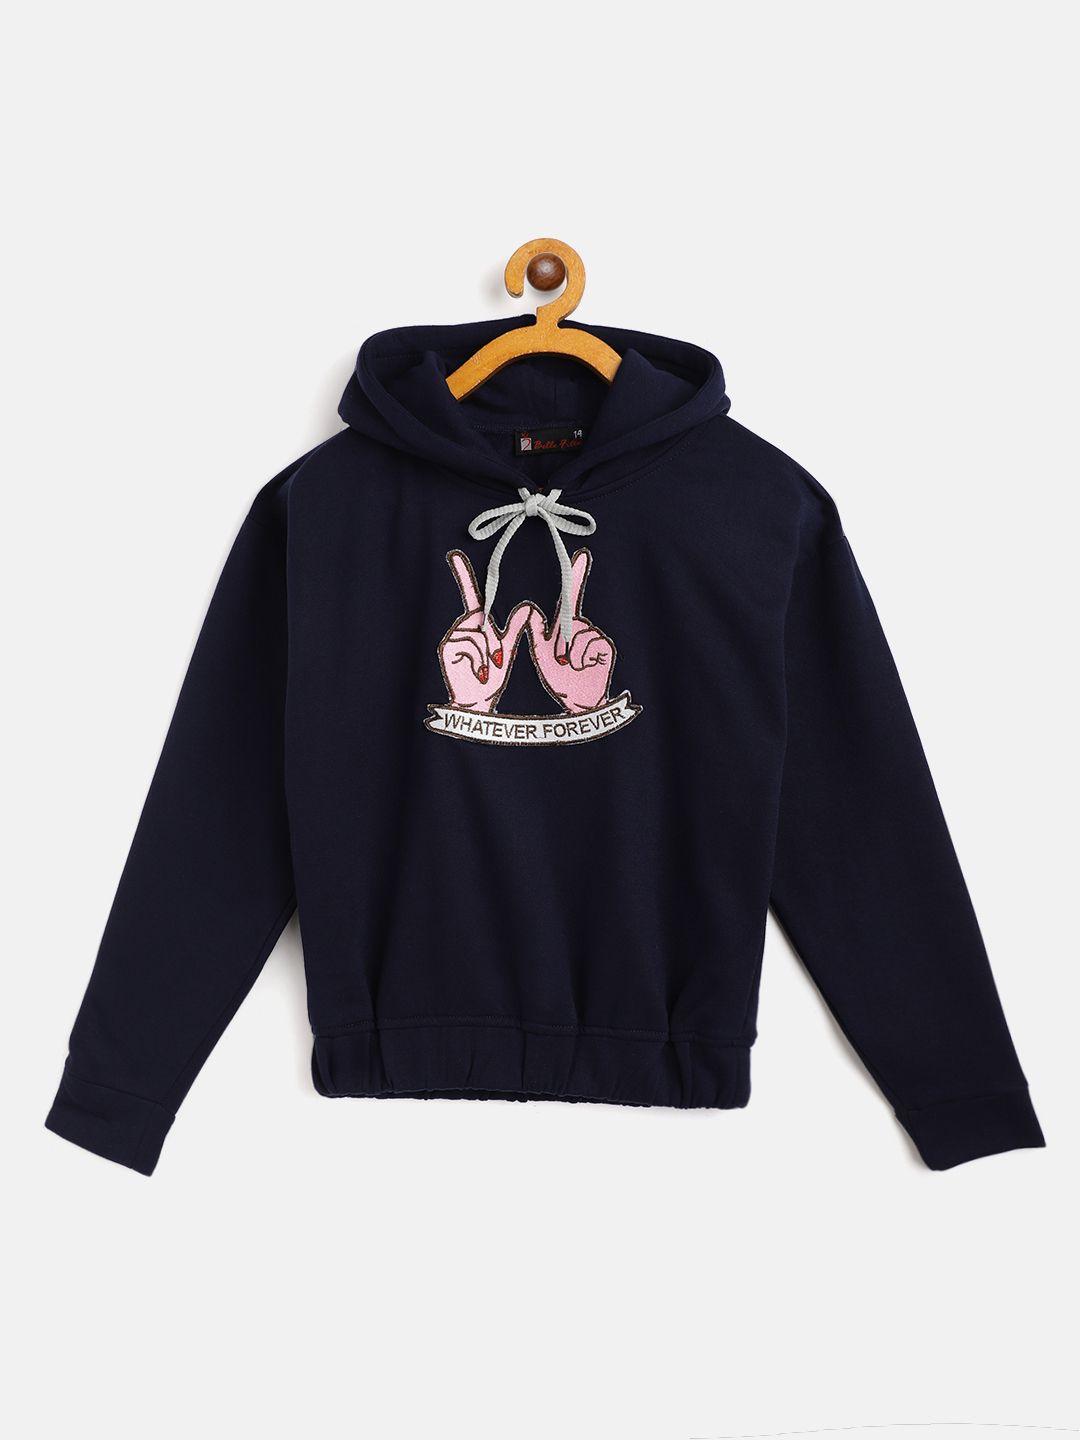 belle fille kids navy blue typography embroidered hooded sweatshirt